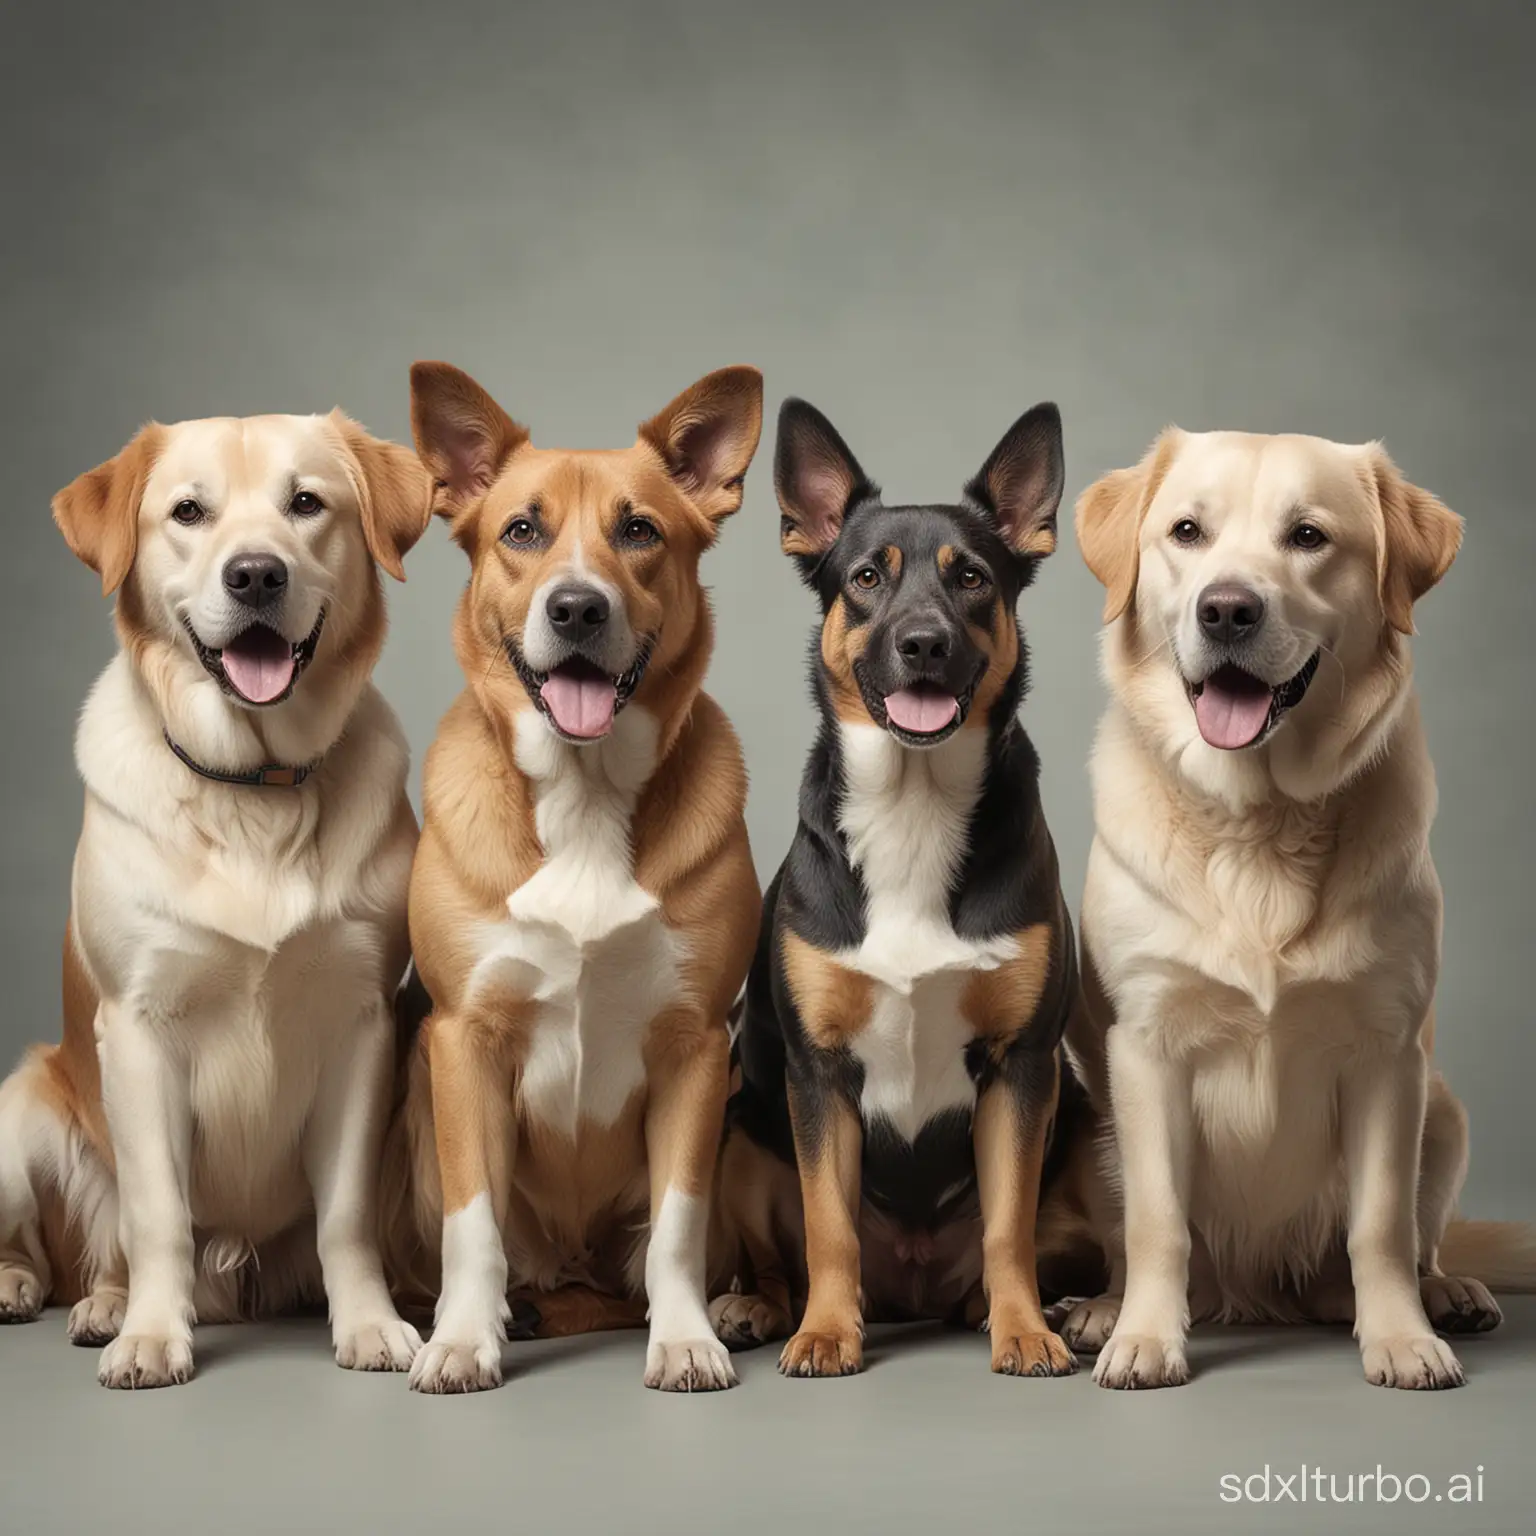 create an image with three dogs